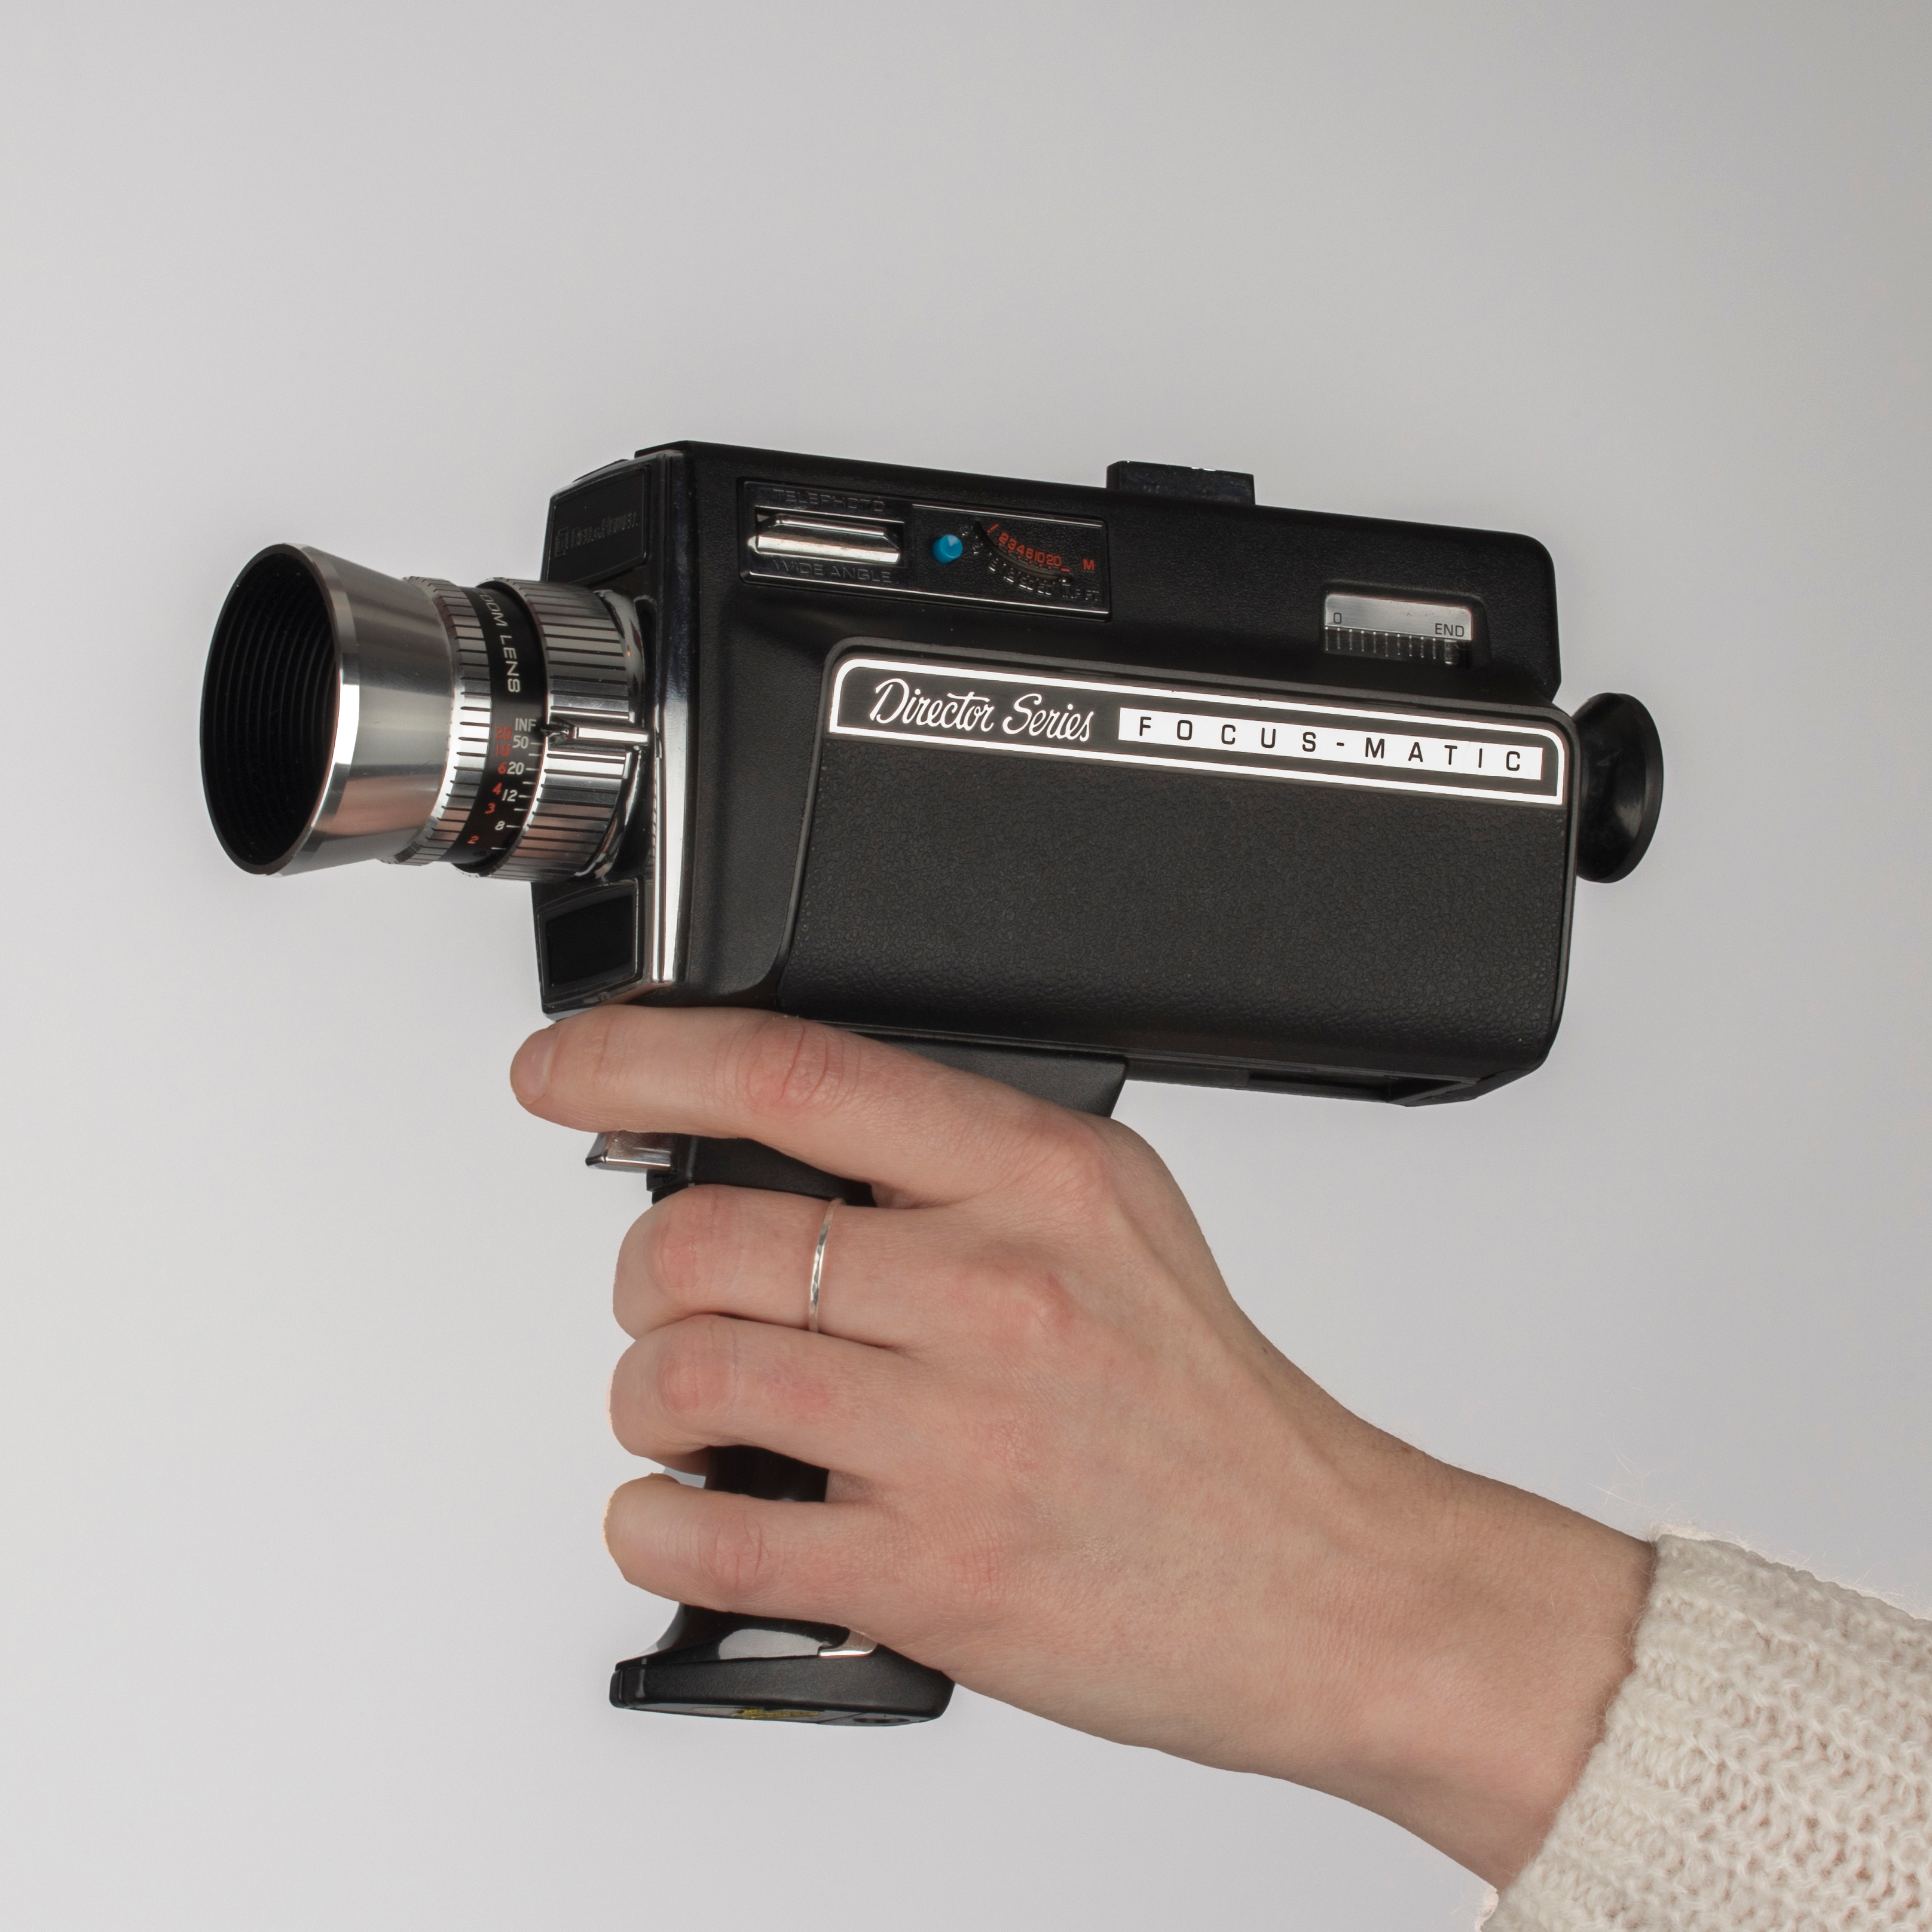 Inducir muy agradable personal Super 8 and regular 8mm movie cameras for sale at New Wave Pool